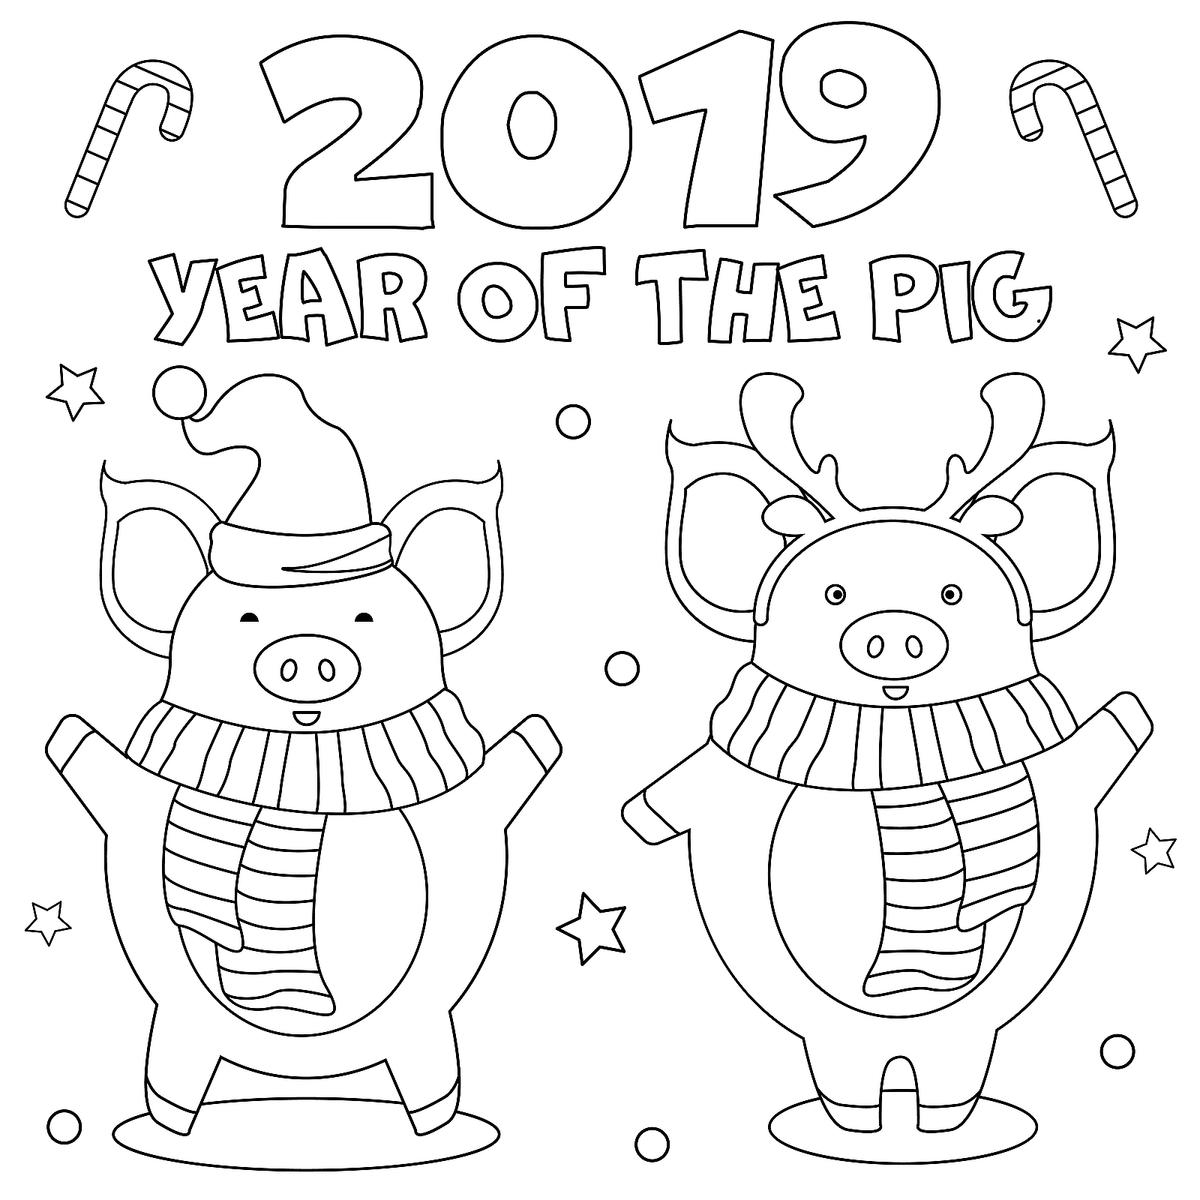 16 January Coloring Pages - Free Printable Coloring Pages